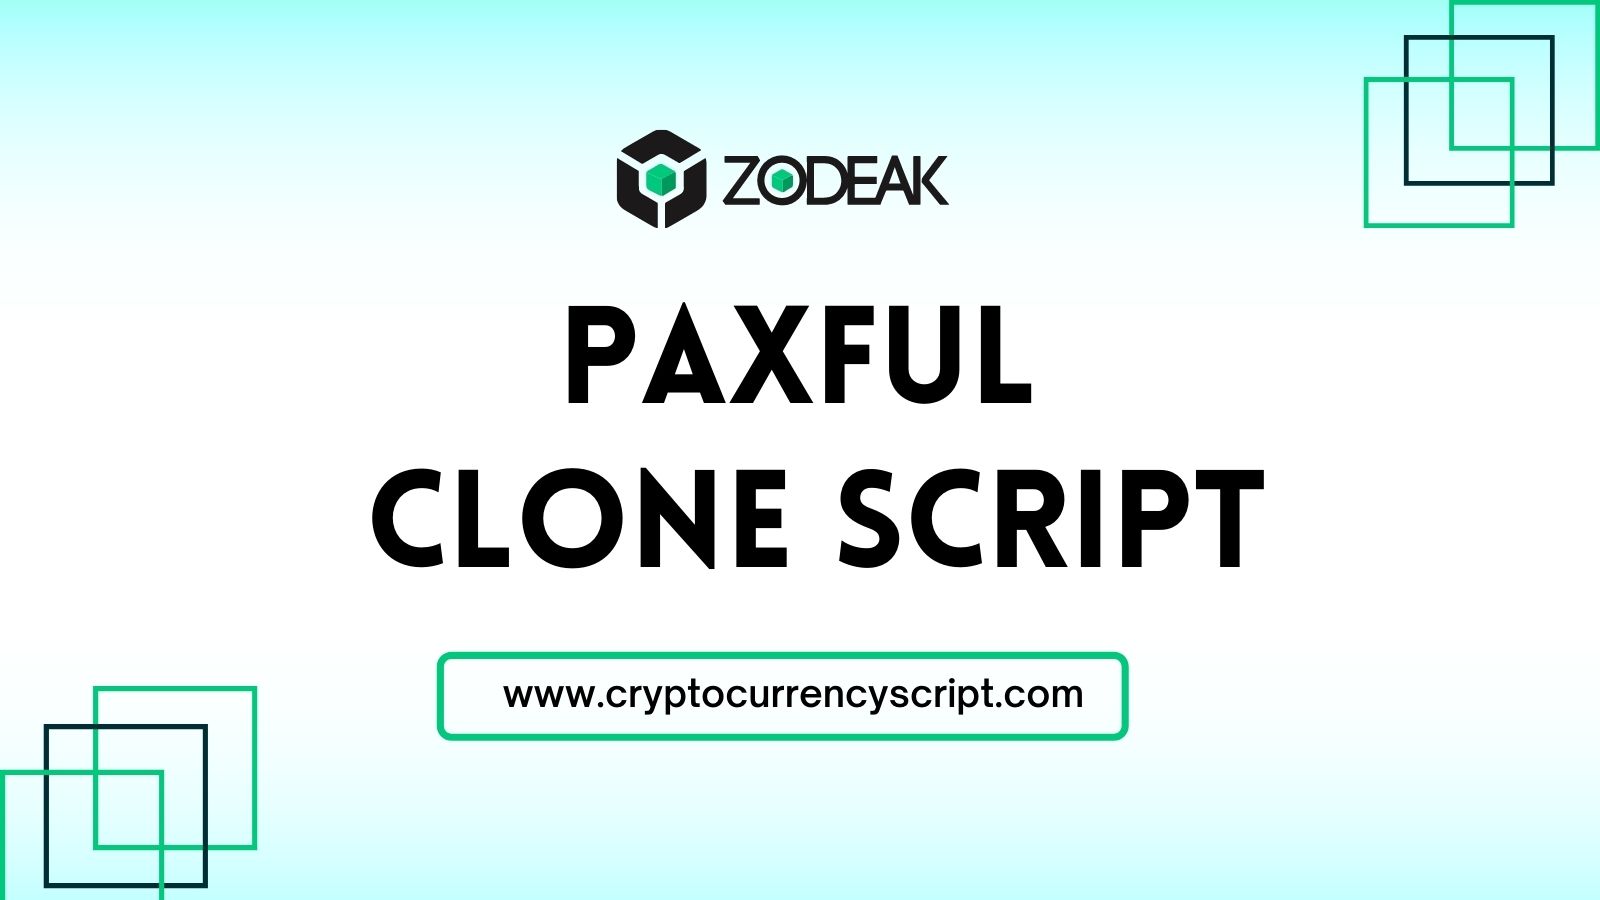 Paxful Clone Script to Build P2P Exchange Like Paxful